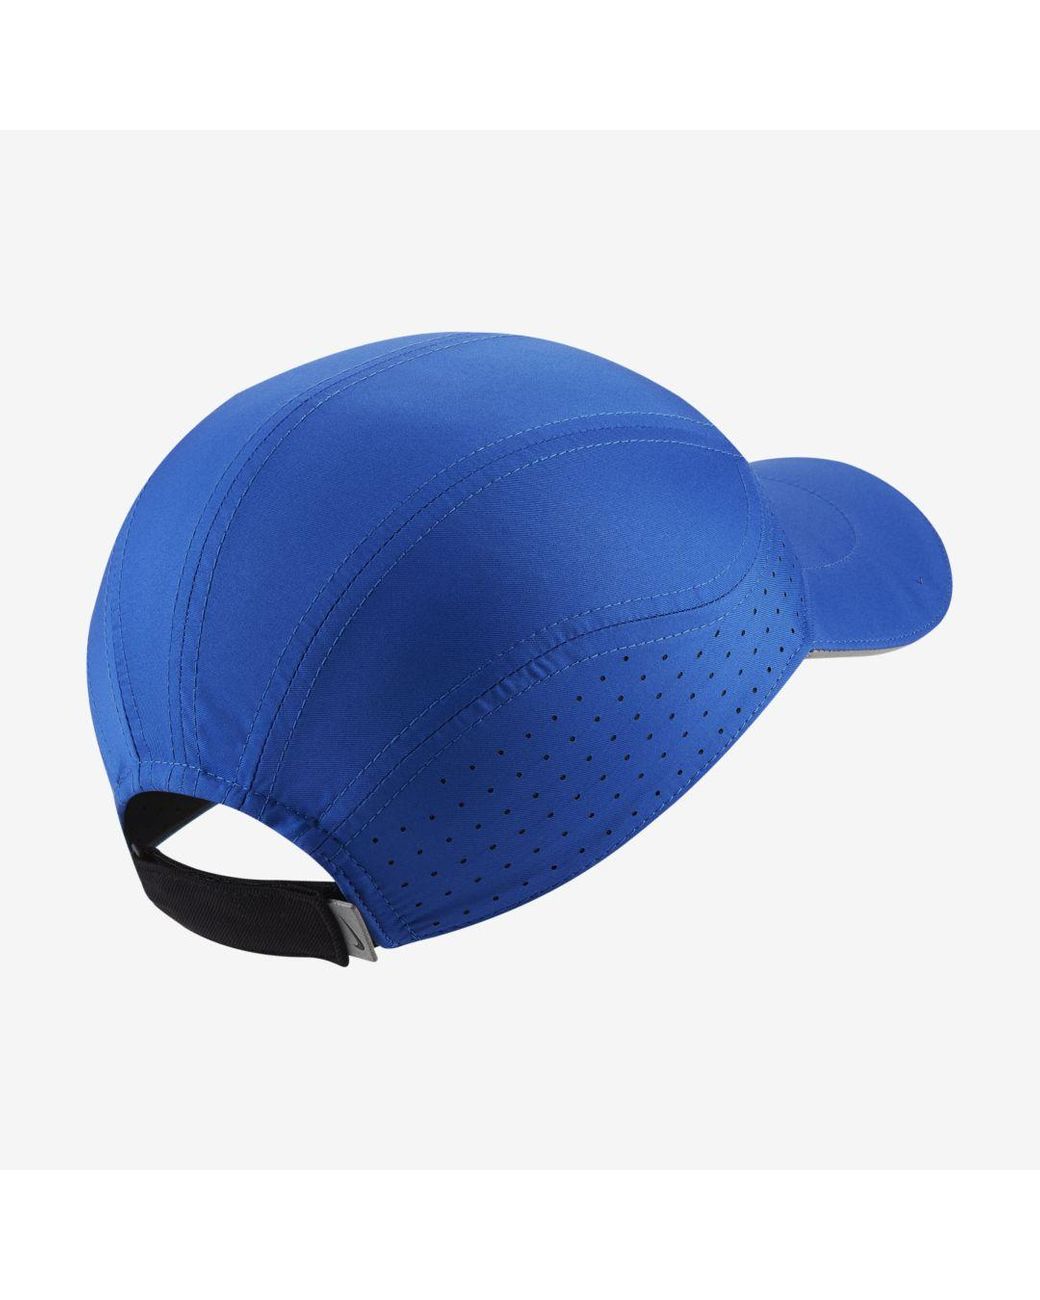 Nike Synthetic Aerobill Tailwind Running Cap in Blue for Men - Lyst